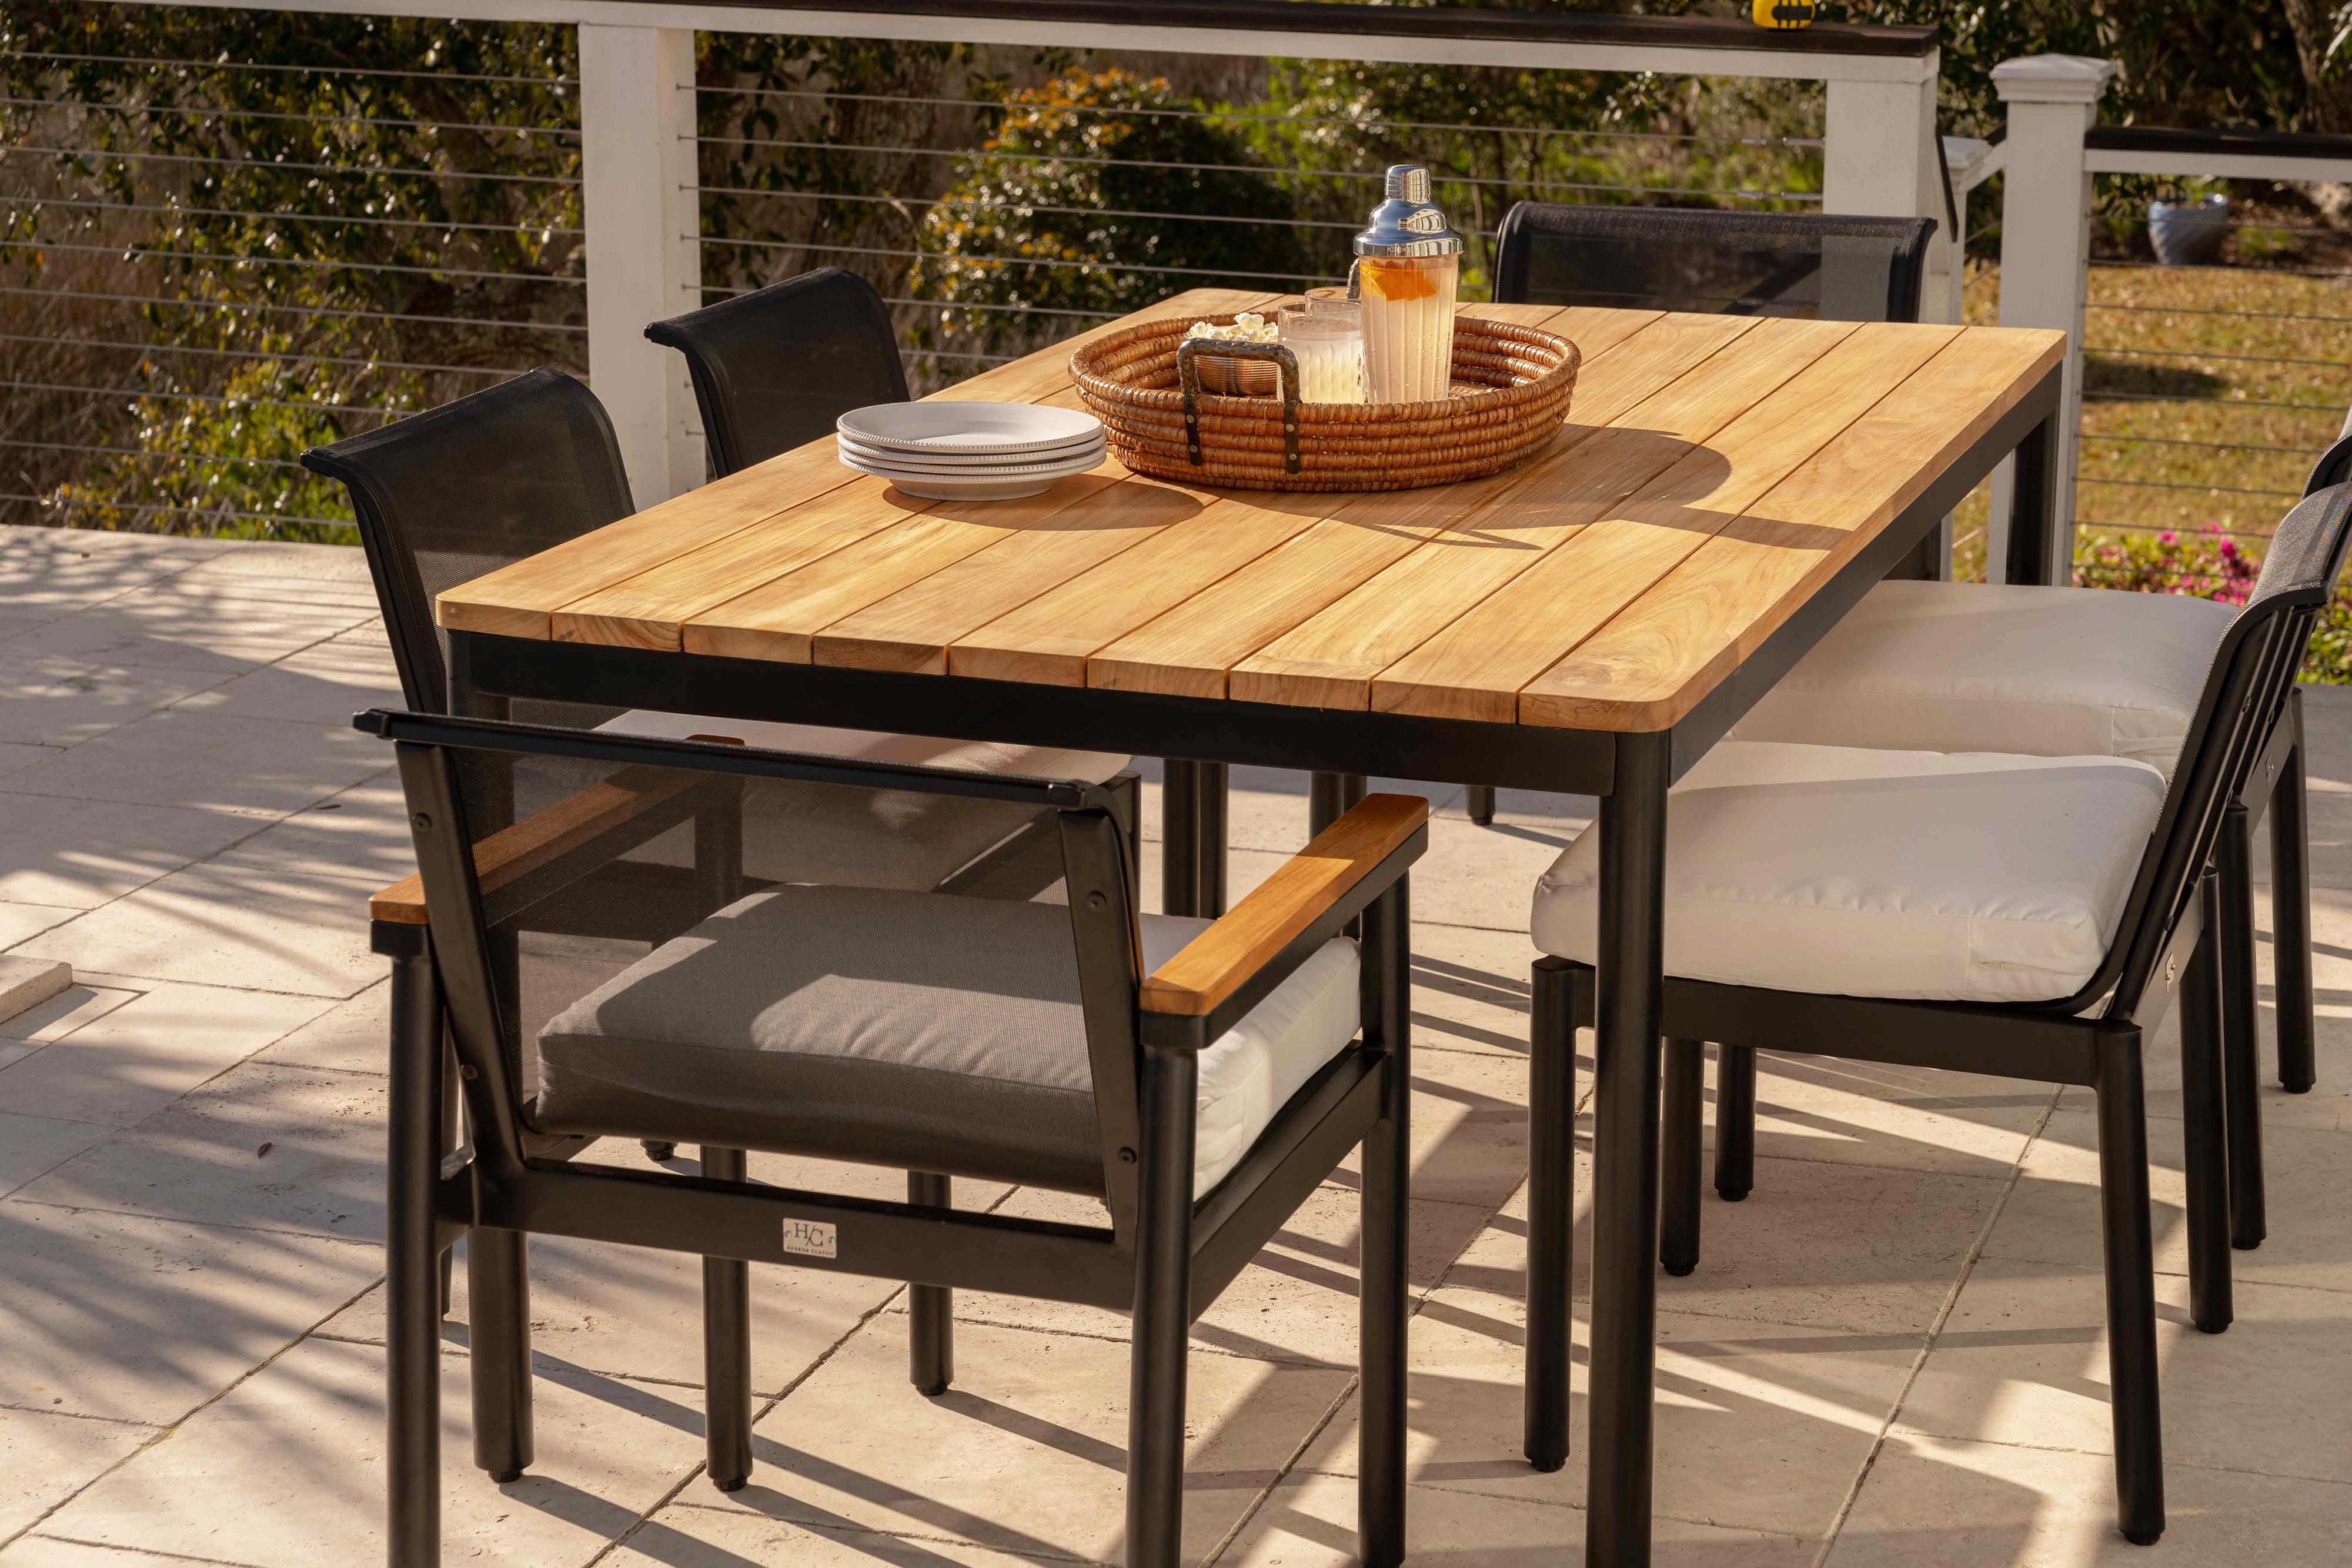 Best Quality Dining Set For Six People That Will Really Last